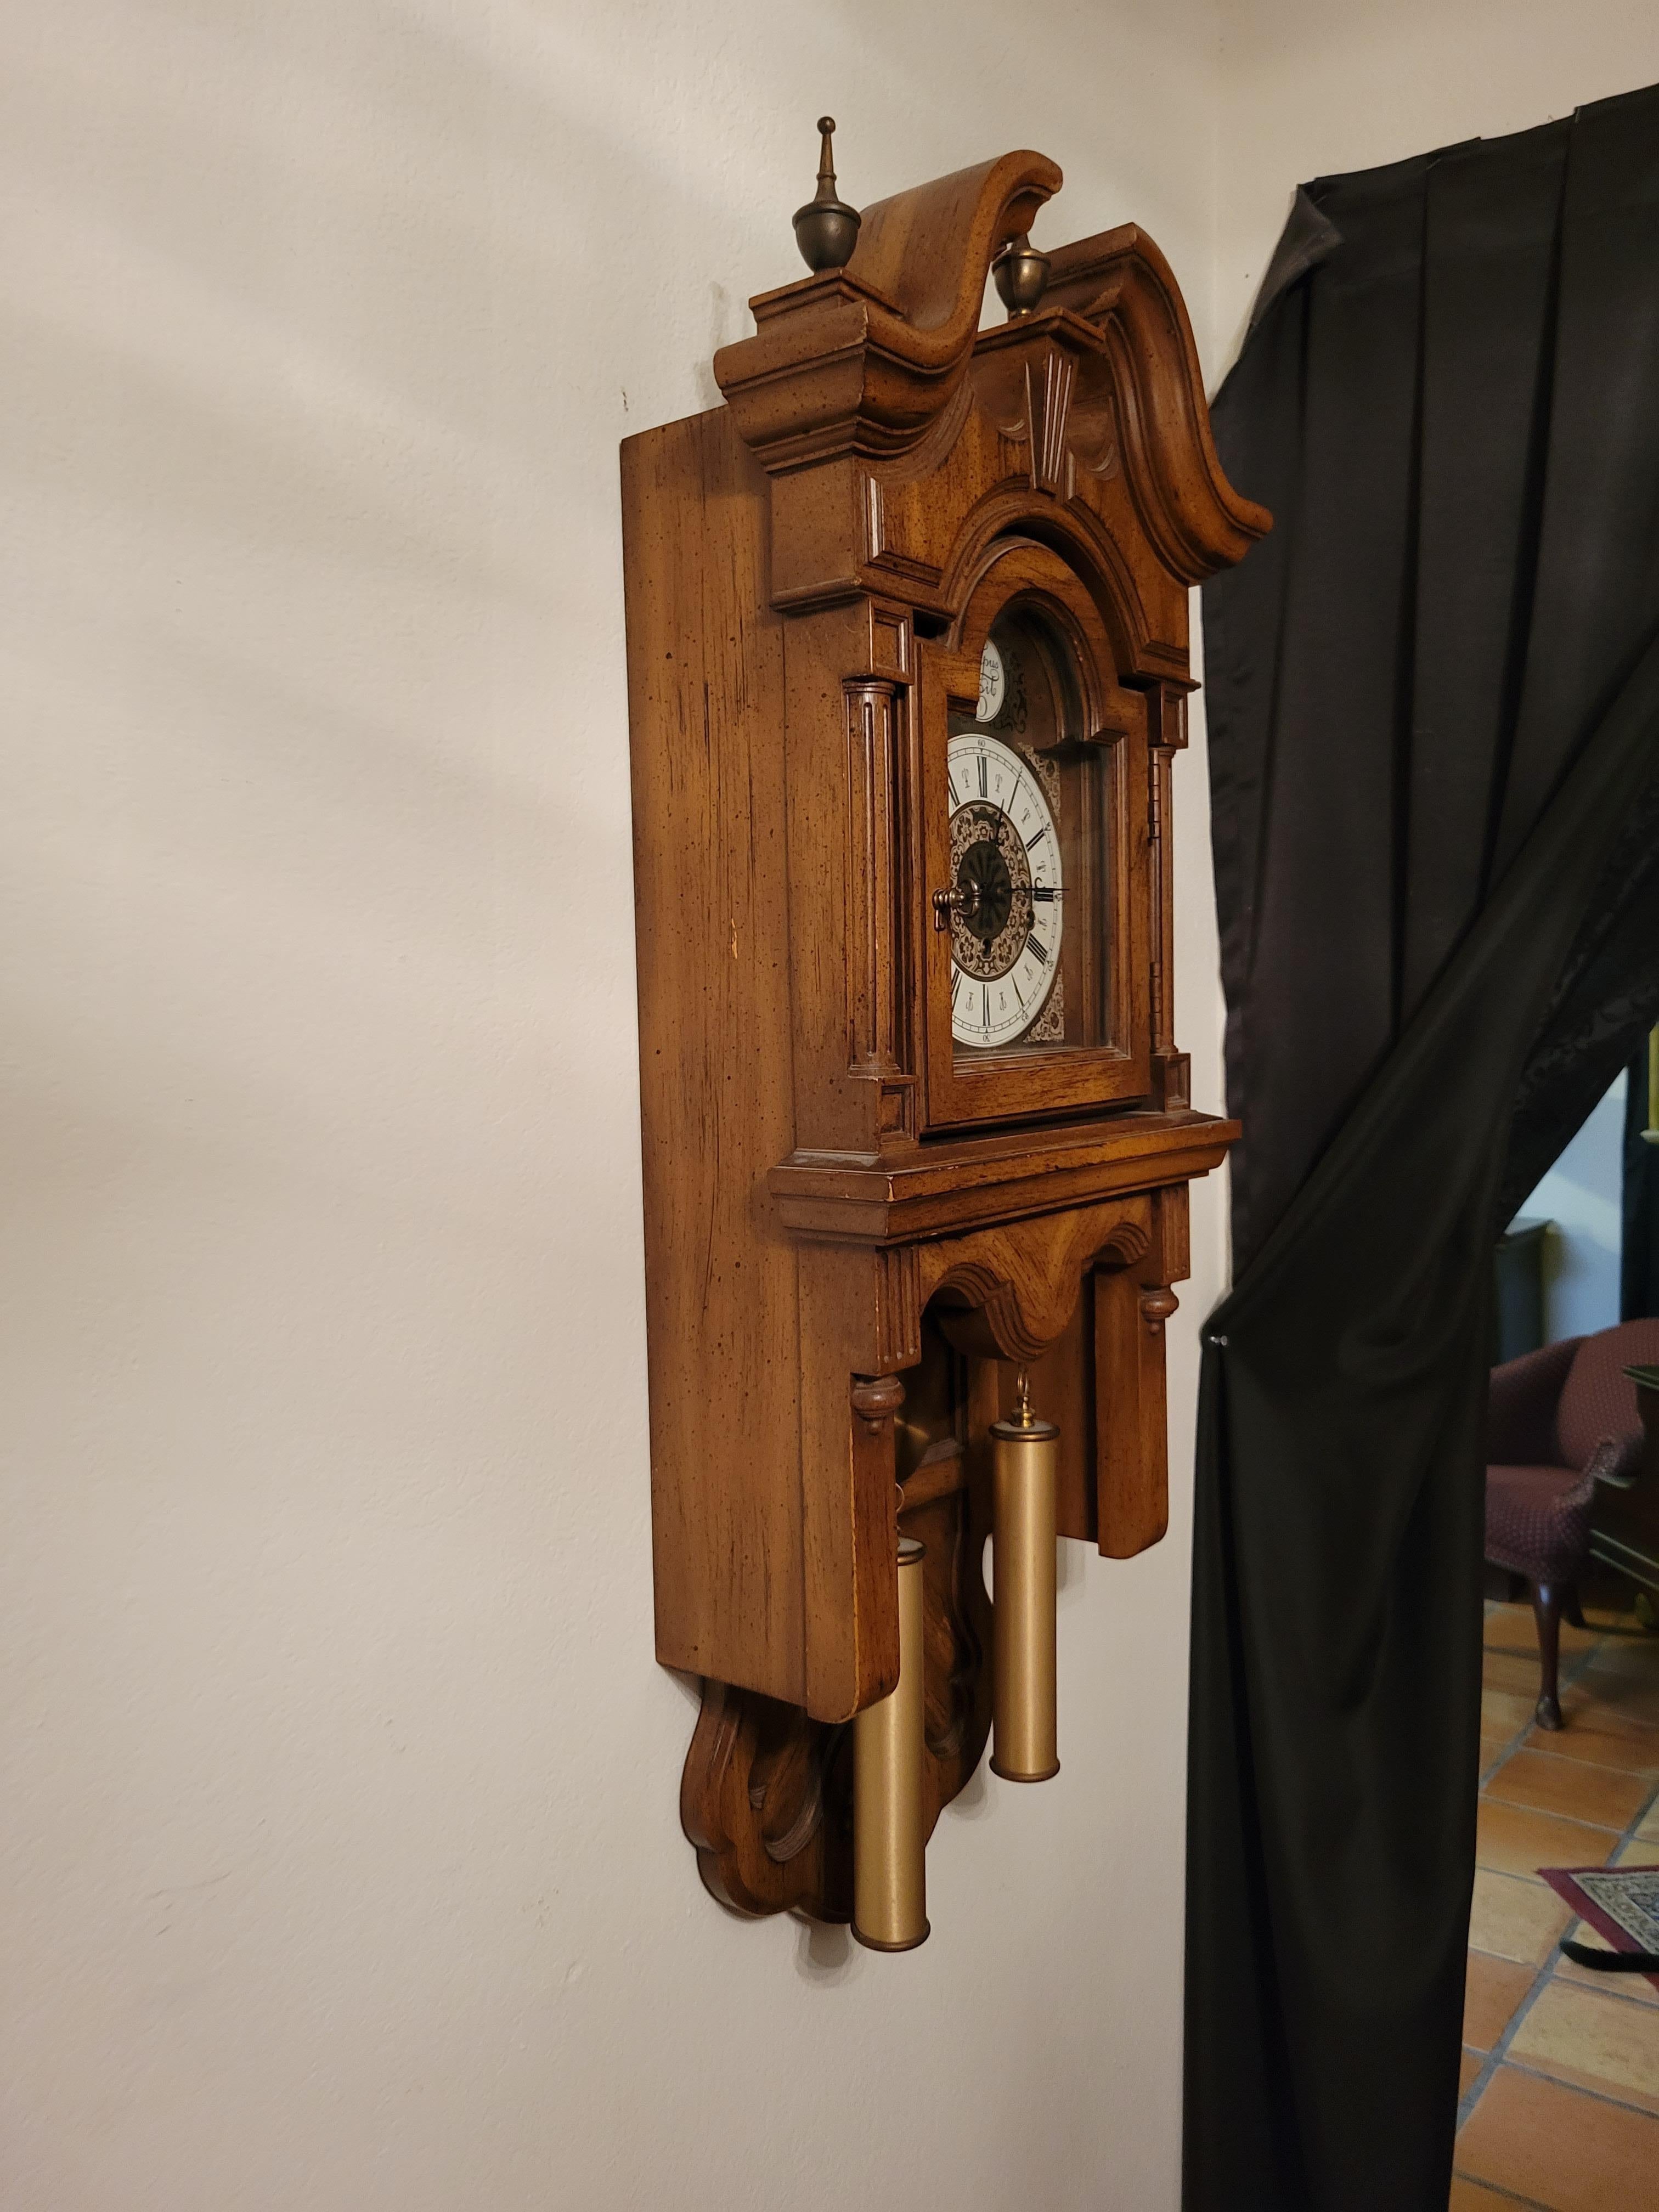 Paragon Vintage Wall Clock with Westminster Chime In Good Condition For Sale In Phoenix, AZ